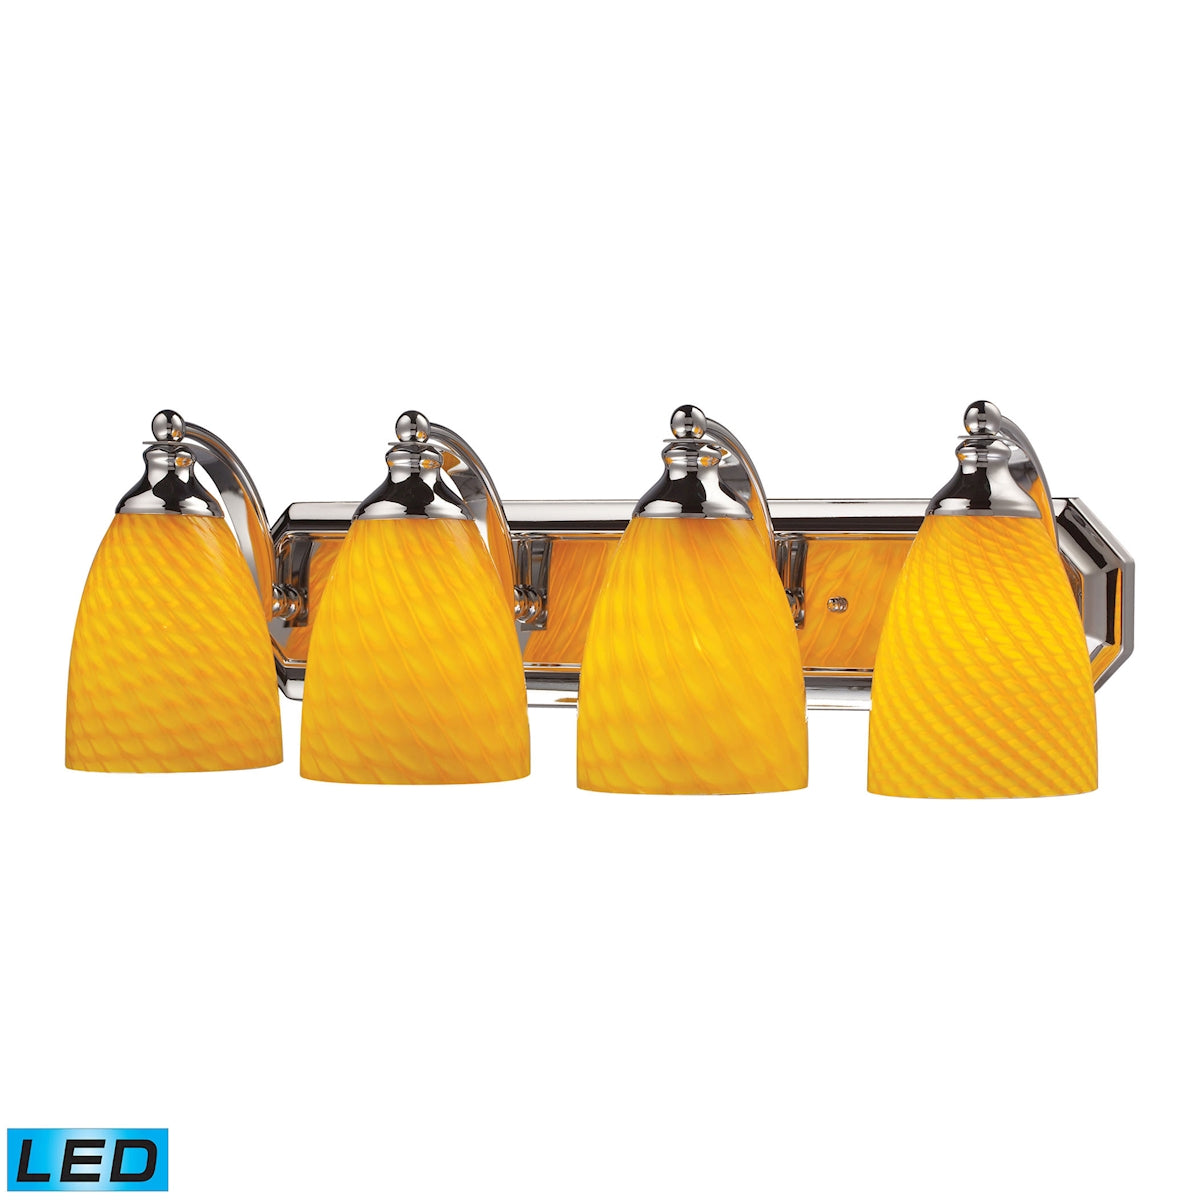 ELK Lighting 570-4C-CN-LED Mix and Match Vanity 4-Light Wall Lamp in Chrome with Canary Glass - Includes LED Bulbs